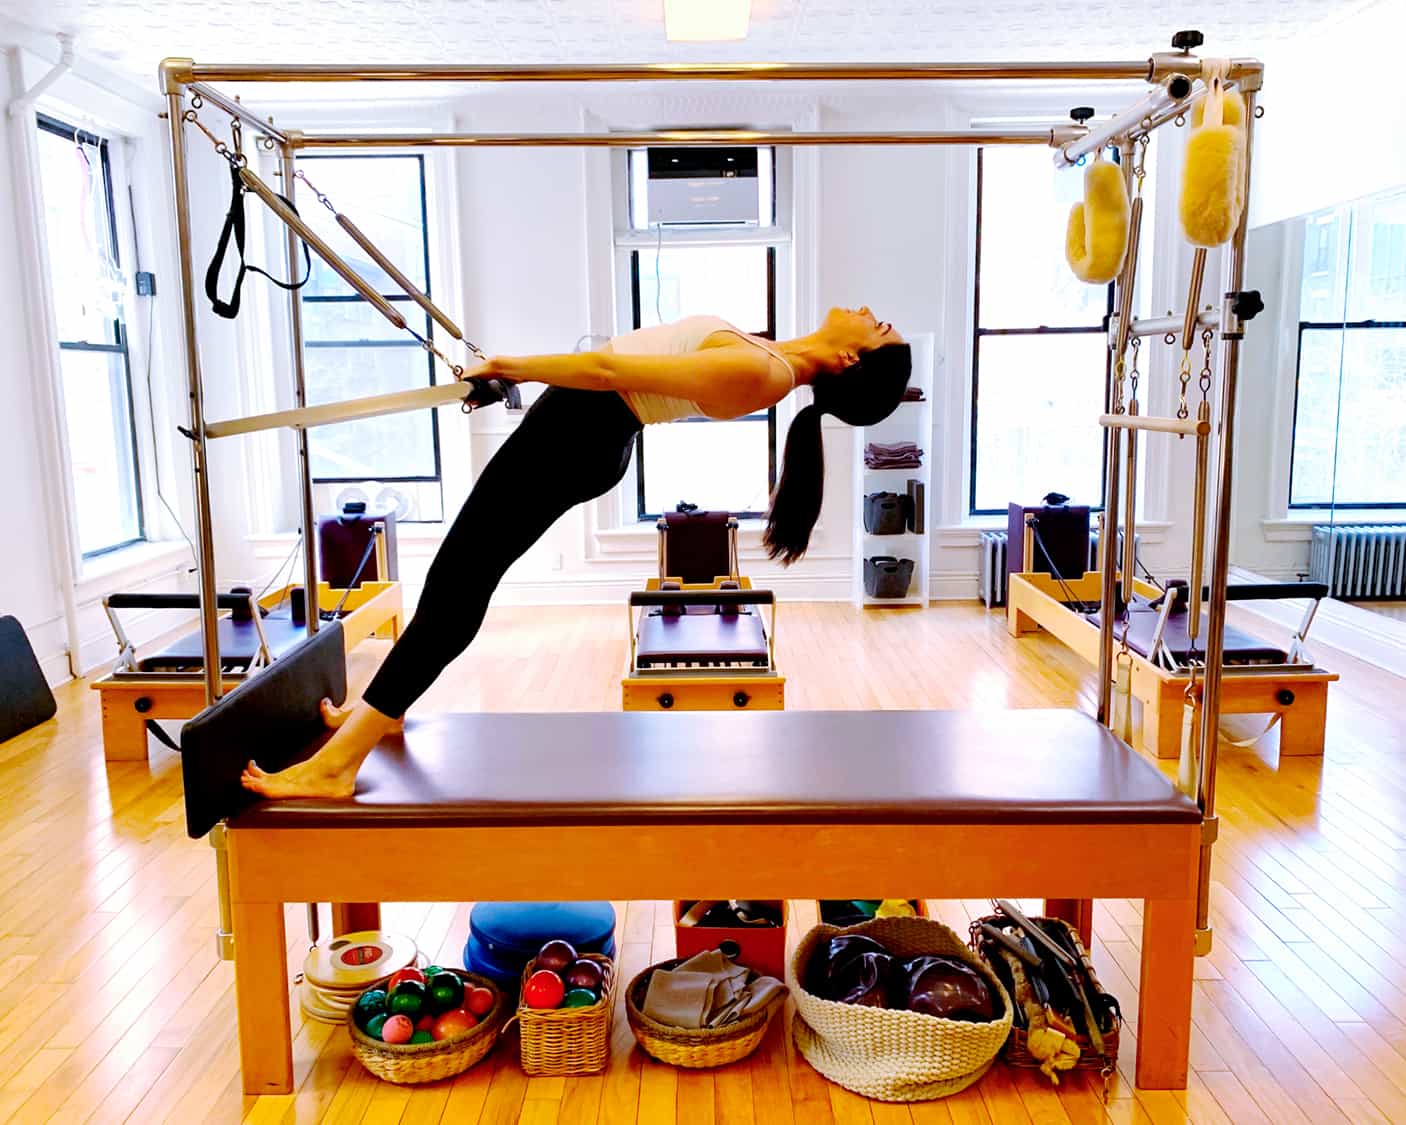 Pilates Instructor performing Bridging on the Trapeze Table. Pilates the long-term game.